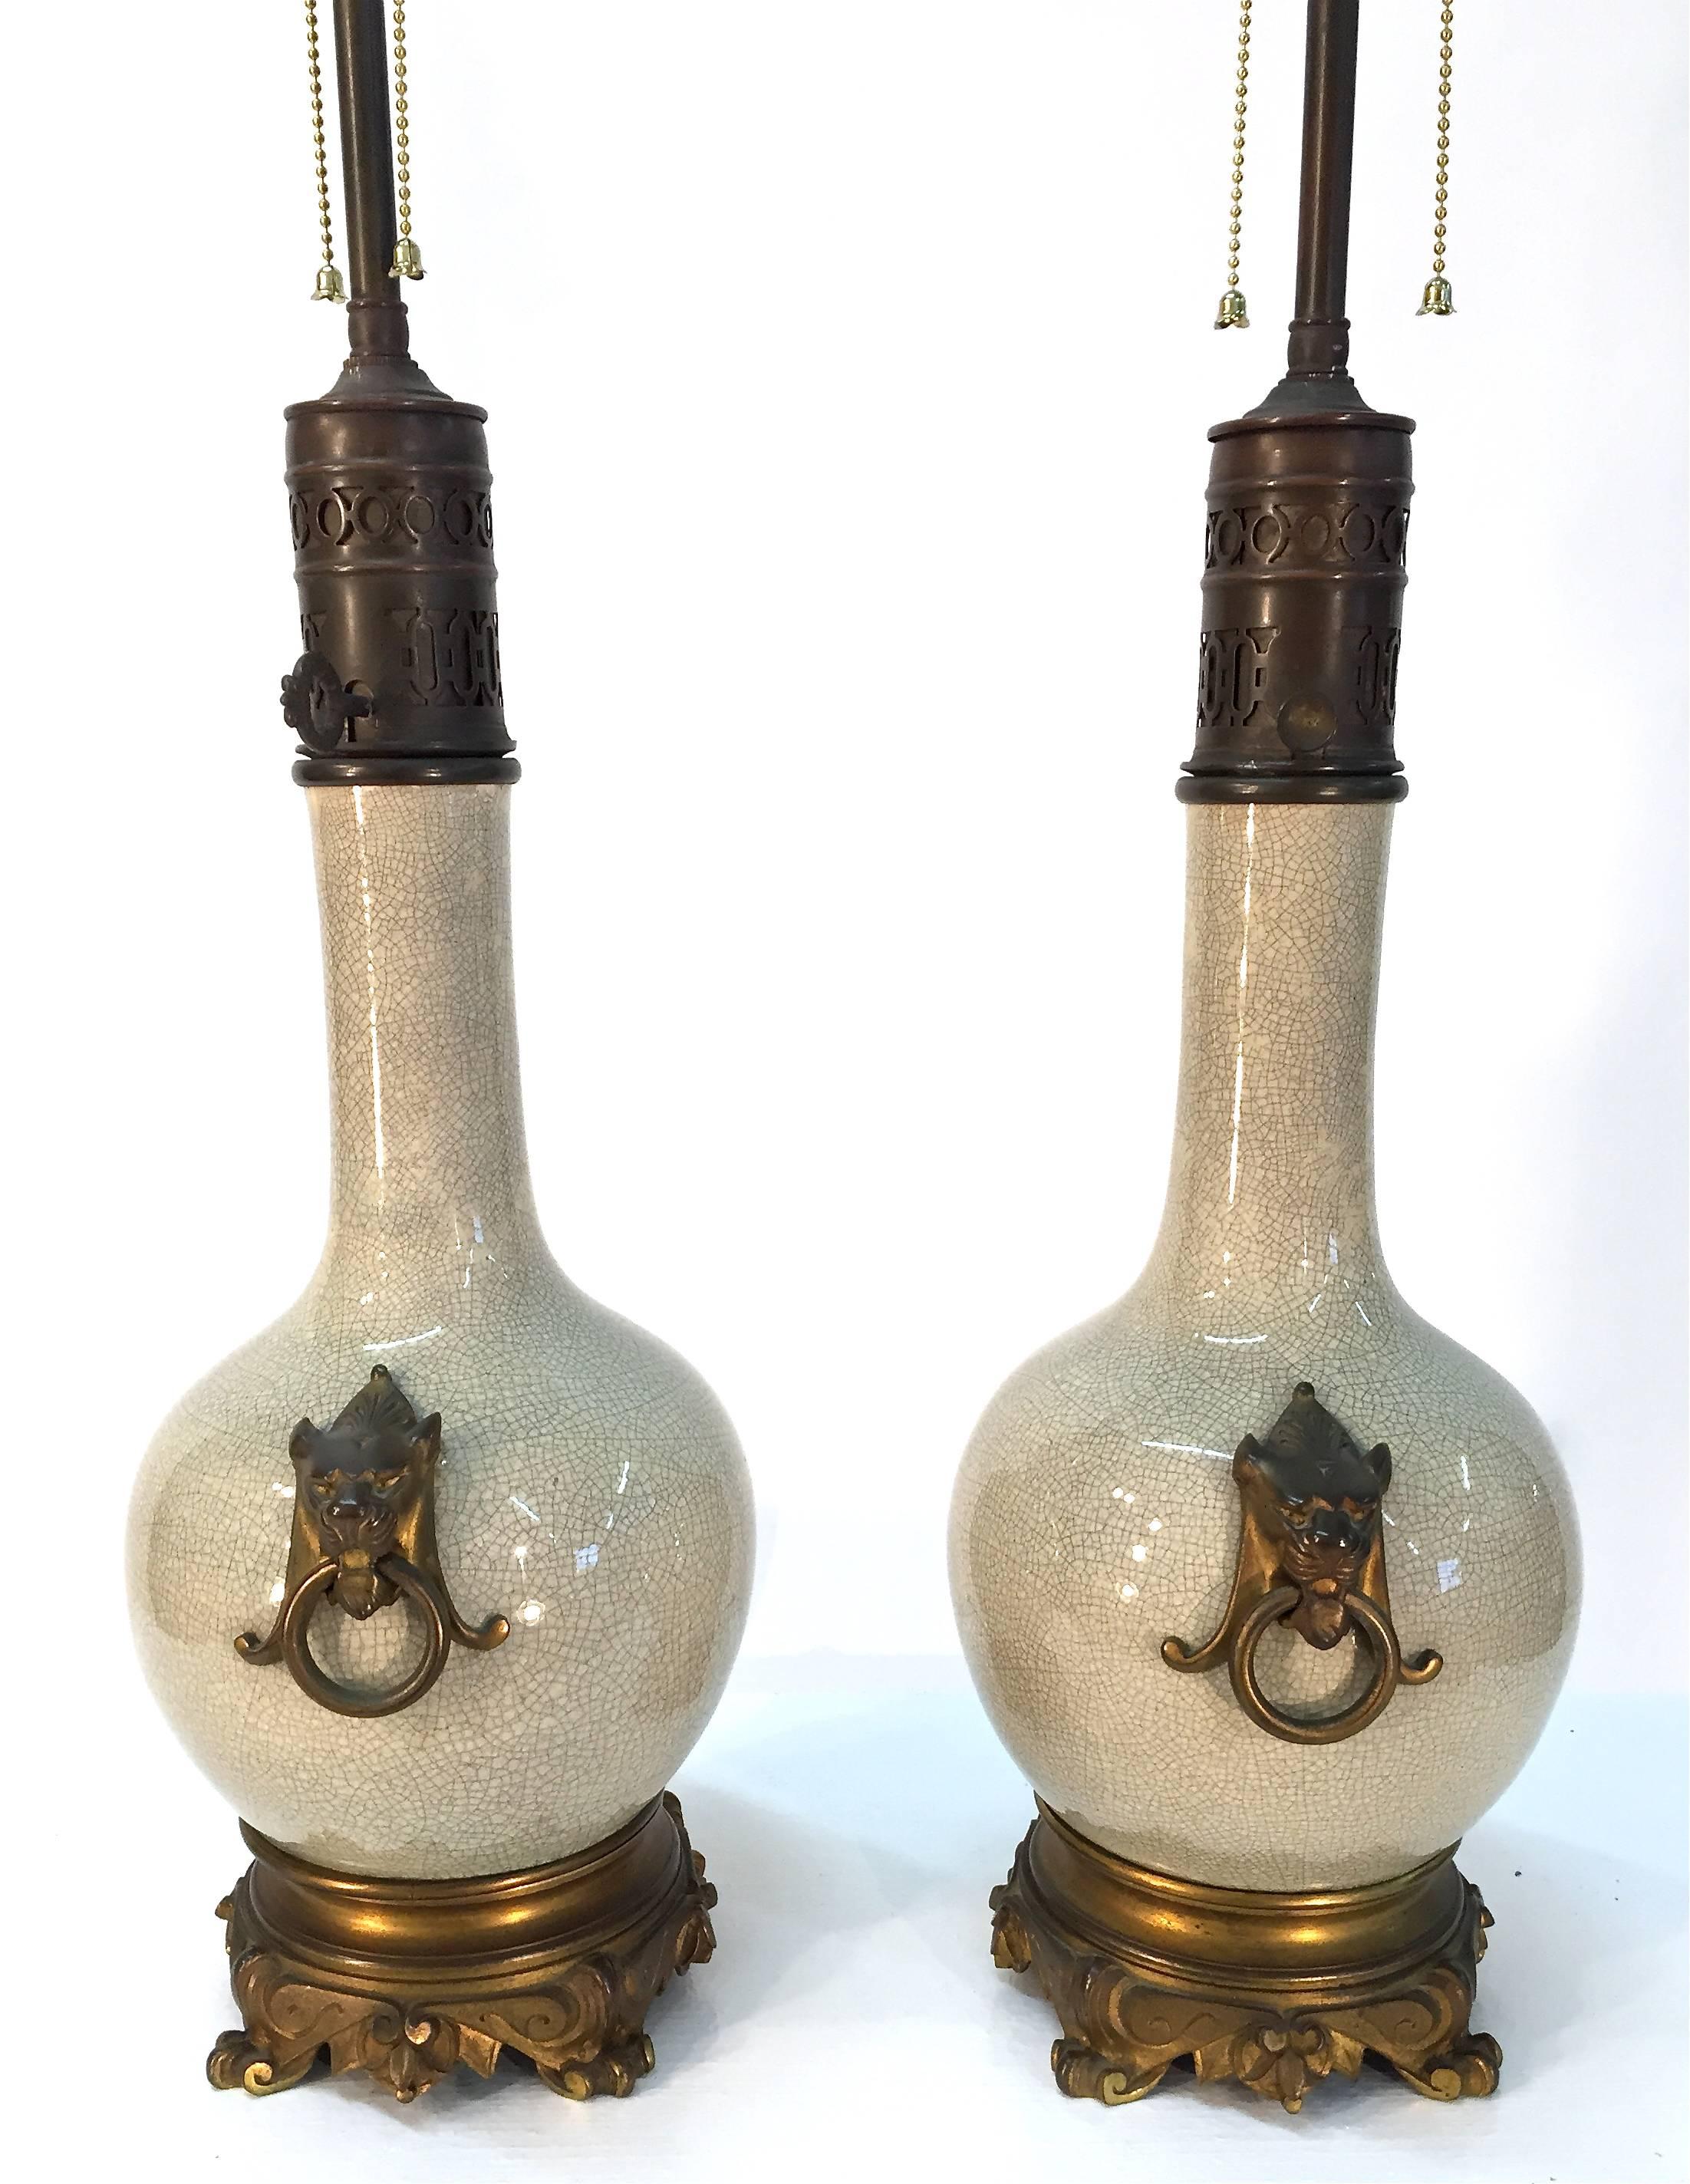 19th Century, French, Bronze-Mounted Crackle Glaze Ceramic Lamps For Sale 3